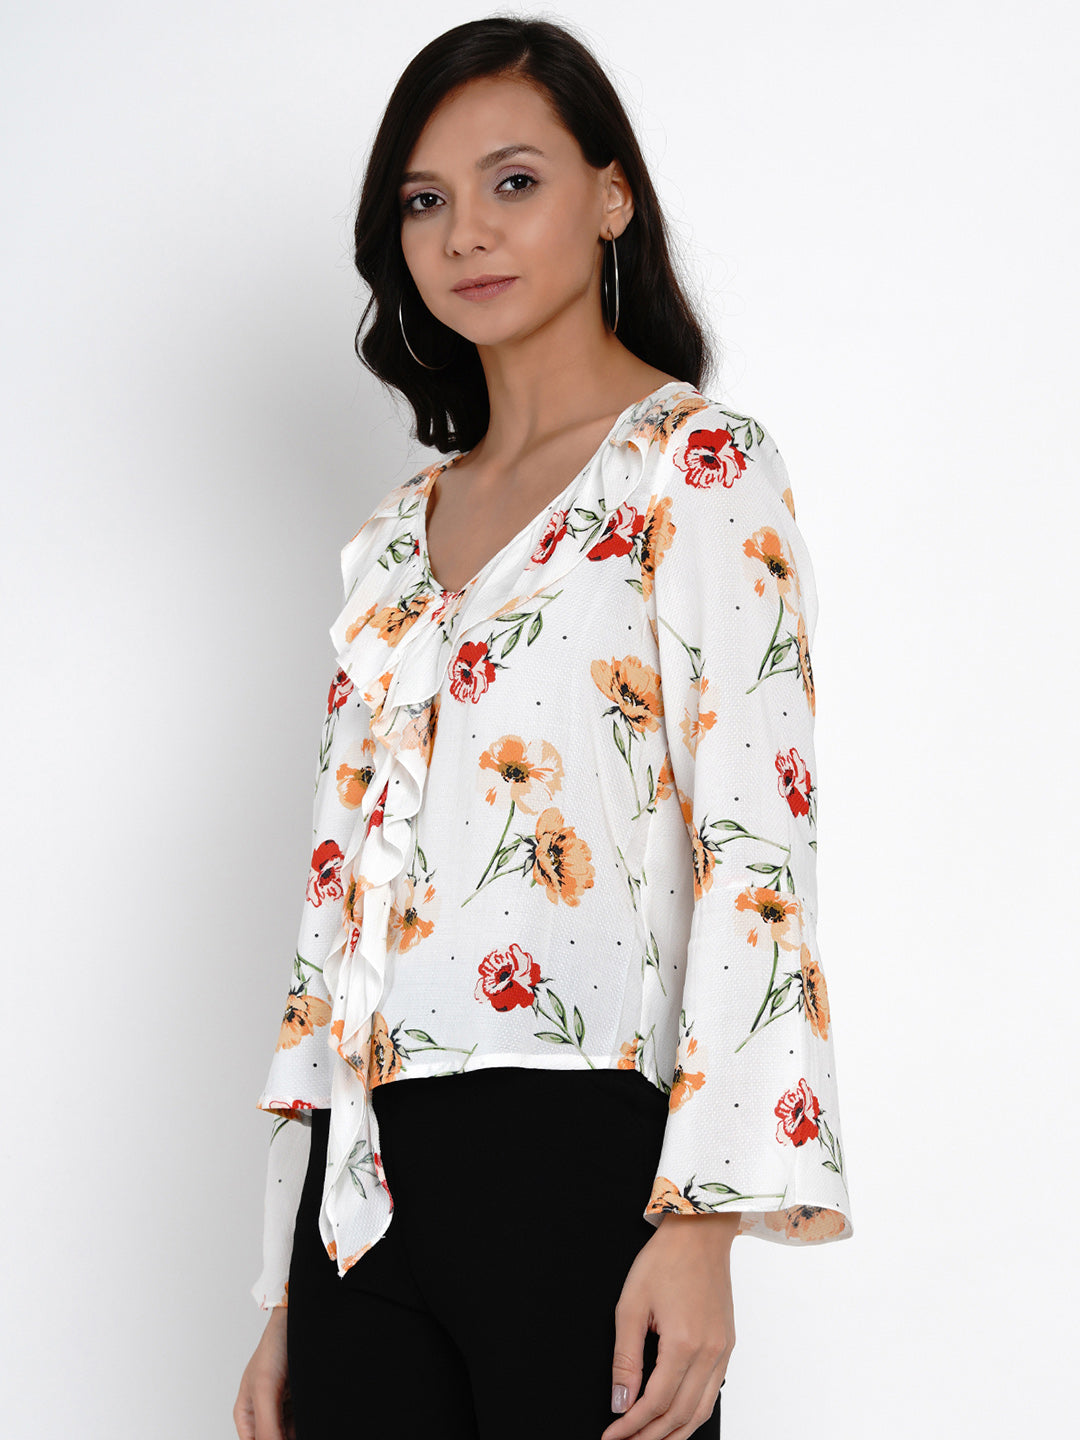 Red 3/4 Sleeve Blouse With Ruffles